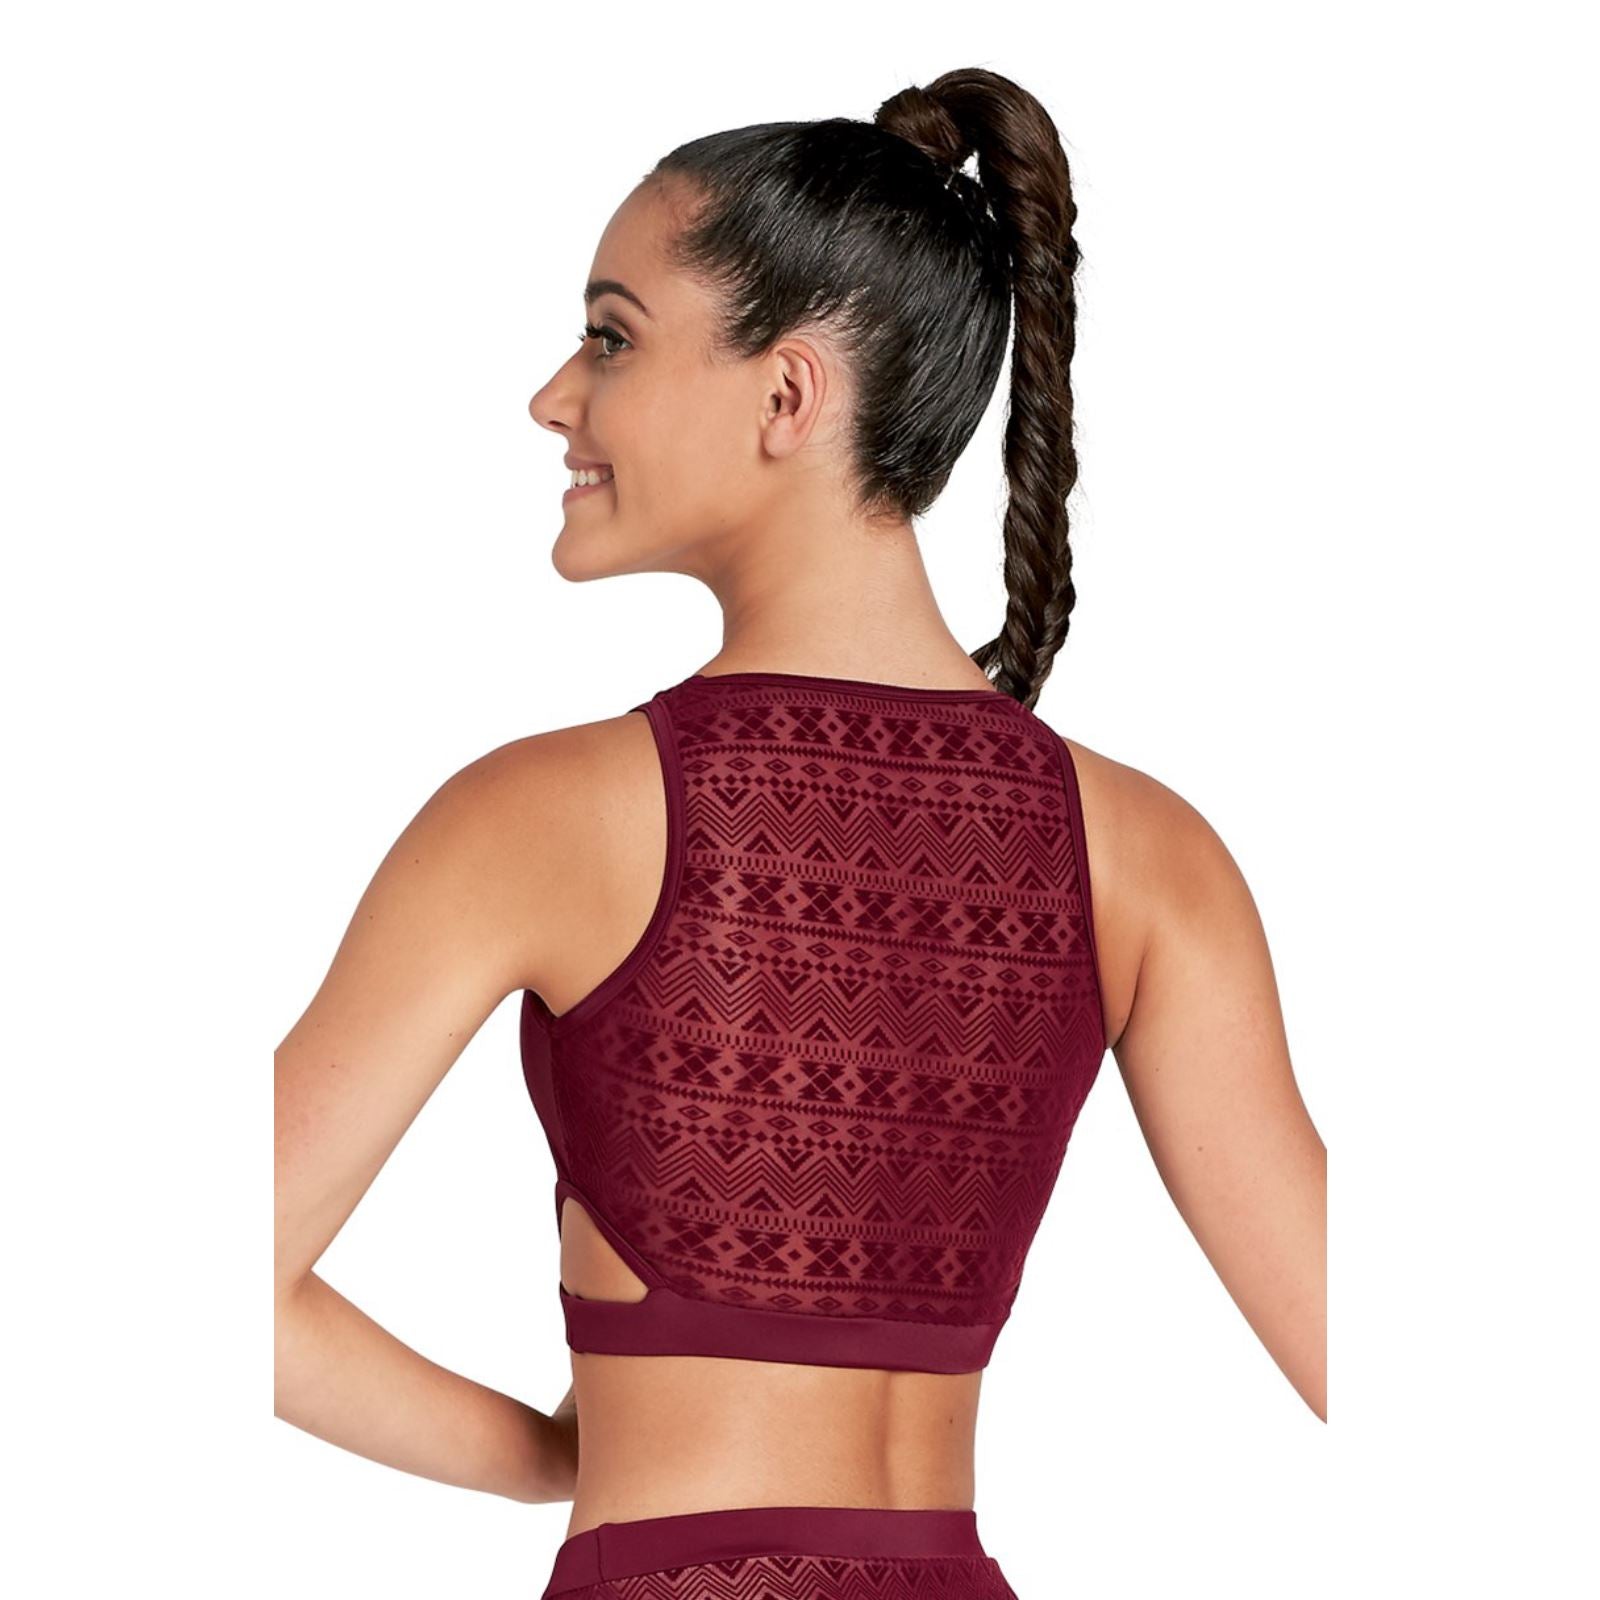 cut out mesh top